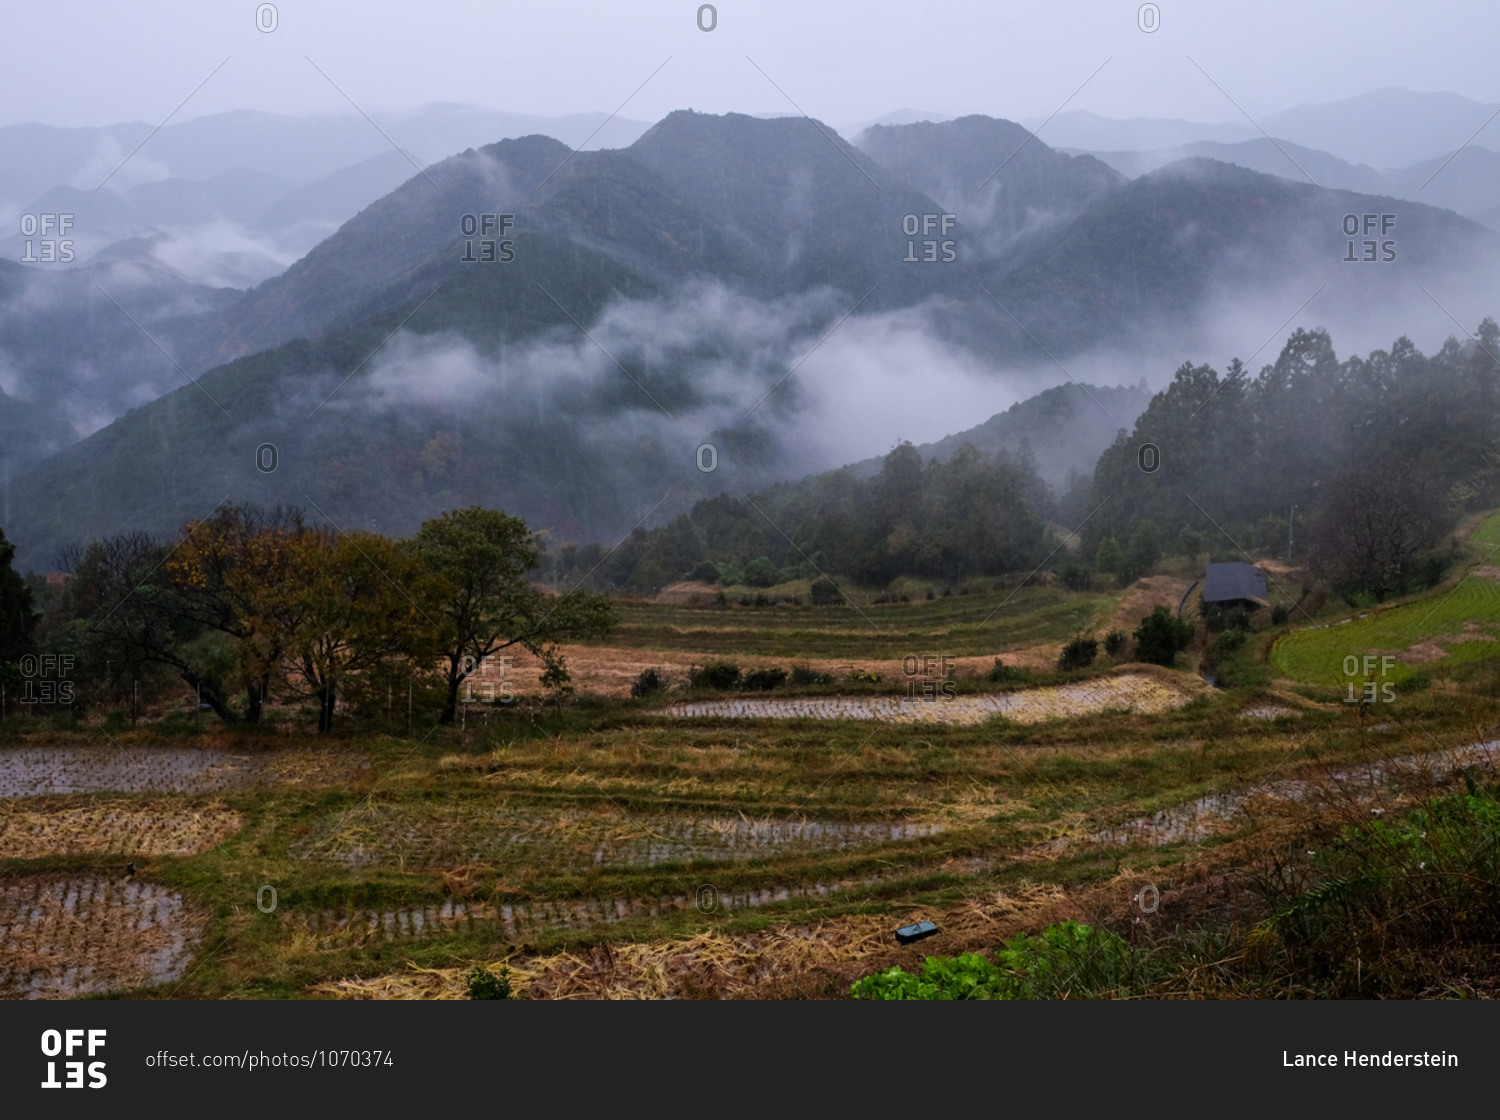 Foggy mountain landscape with rice paddies in the foreground in Wakayama, Japan